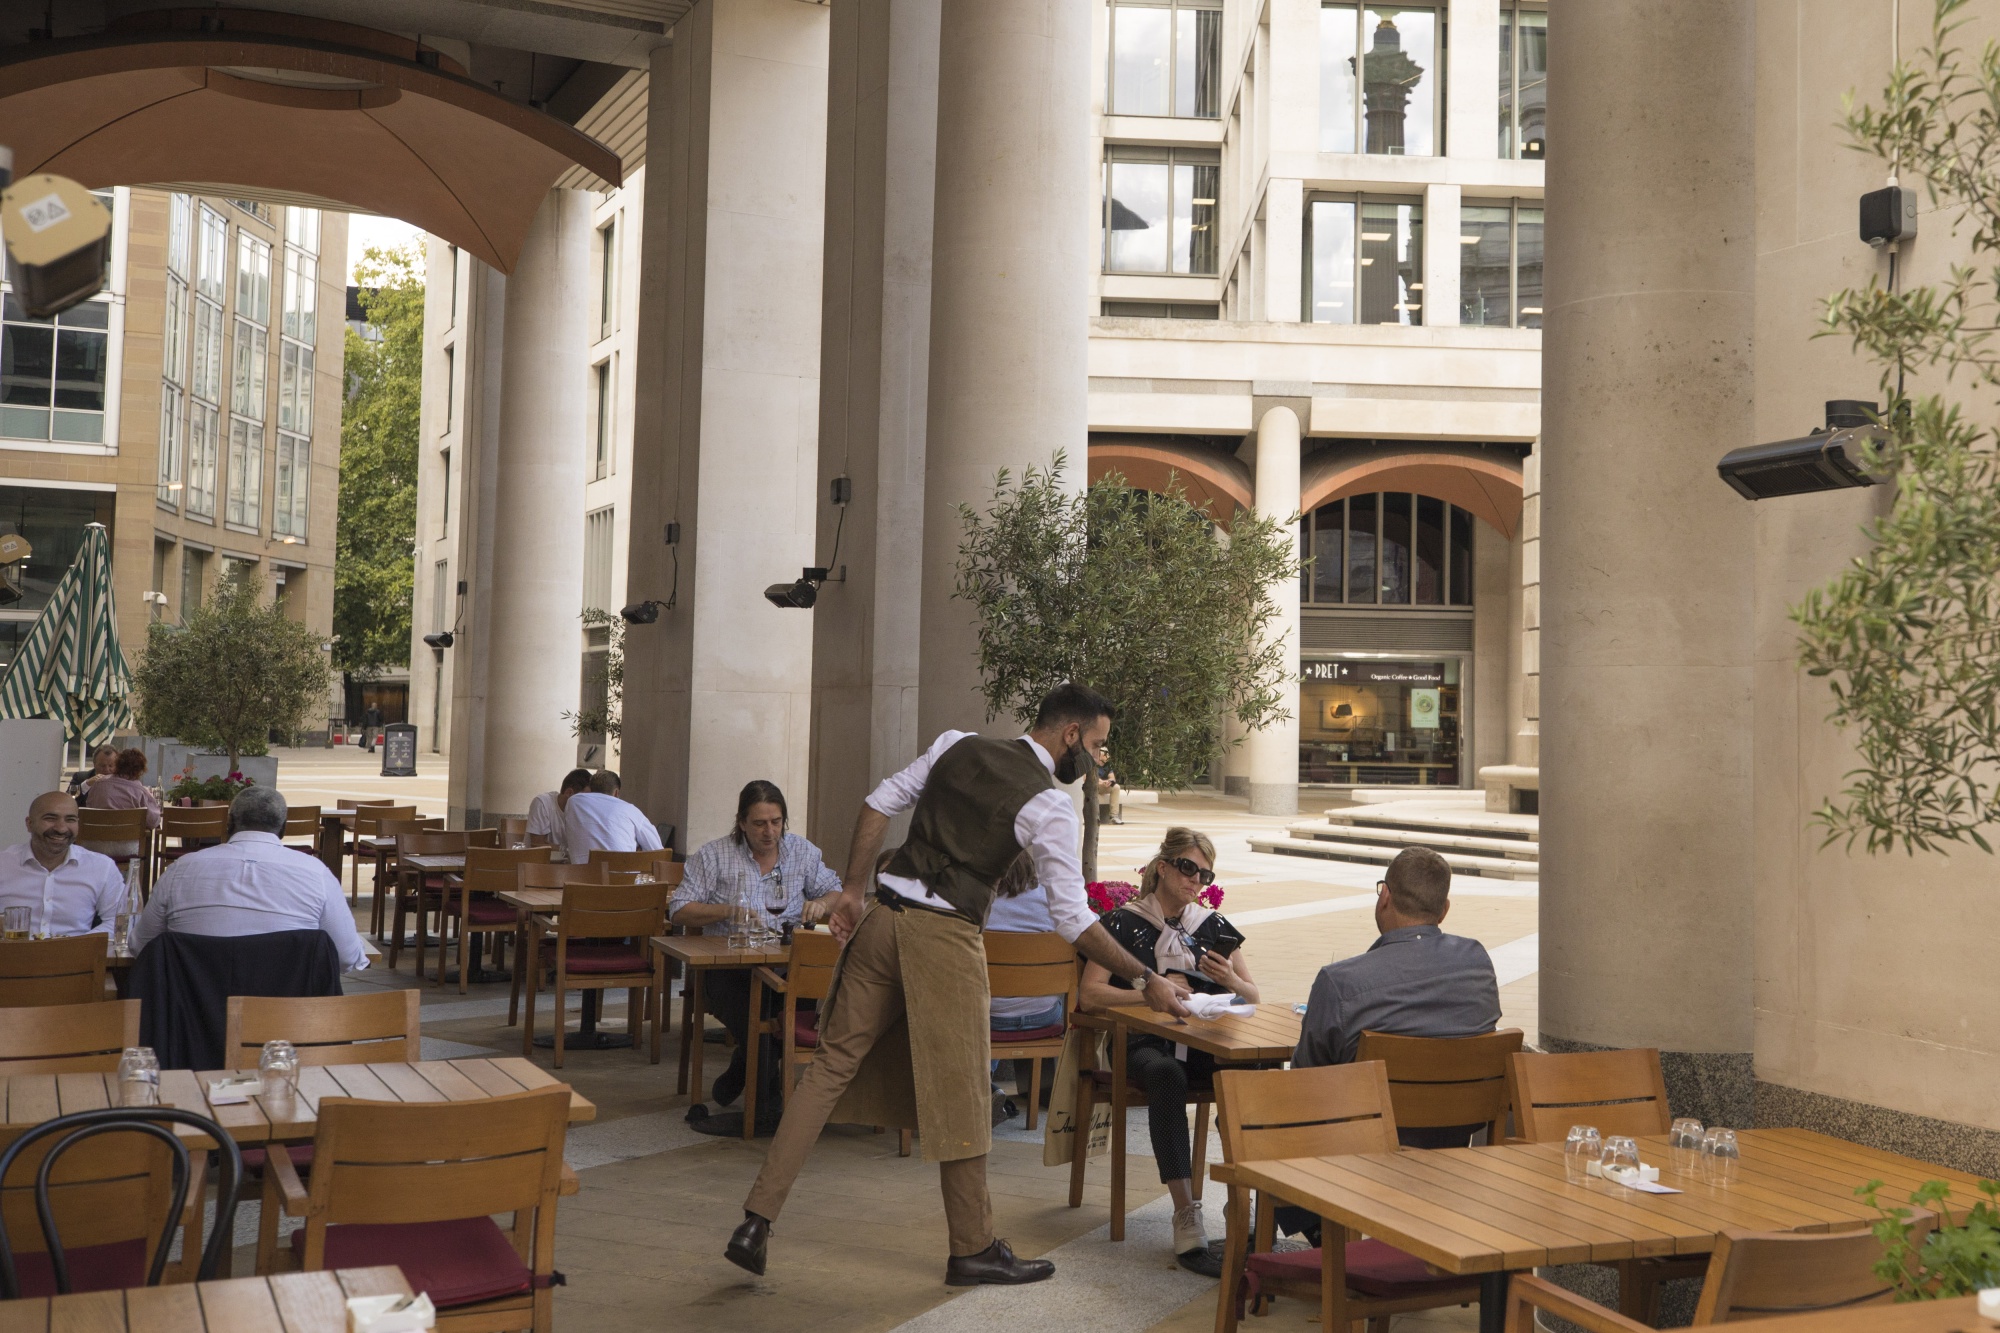 A waiter serves diners outside a restaurant at The London Stock Exchange in London, U.K., on Aug. 3.